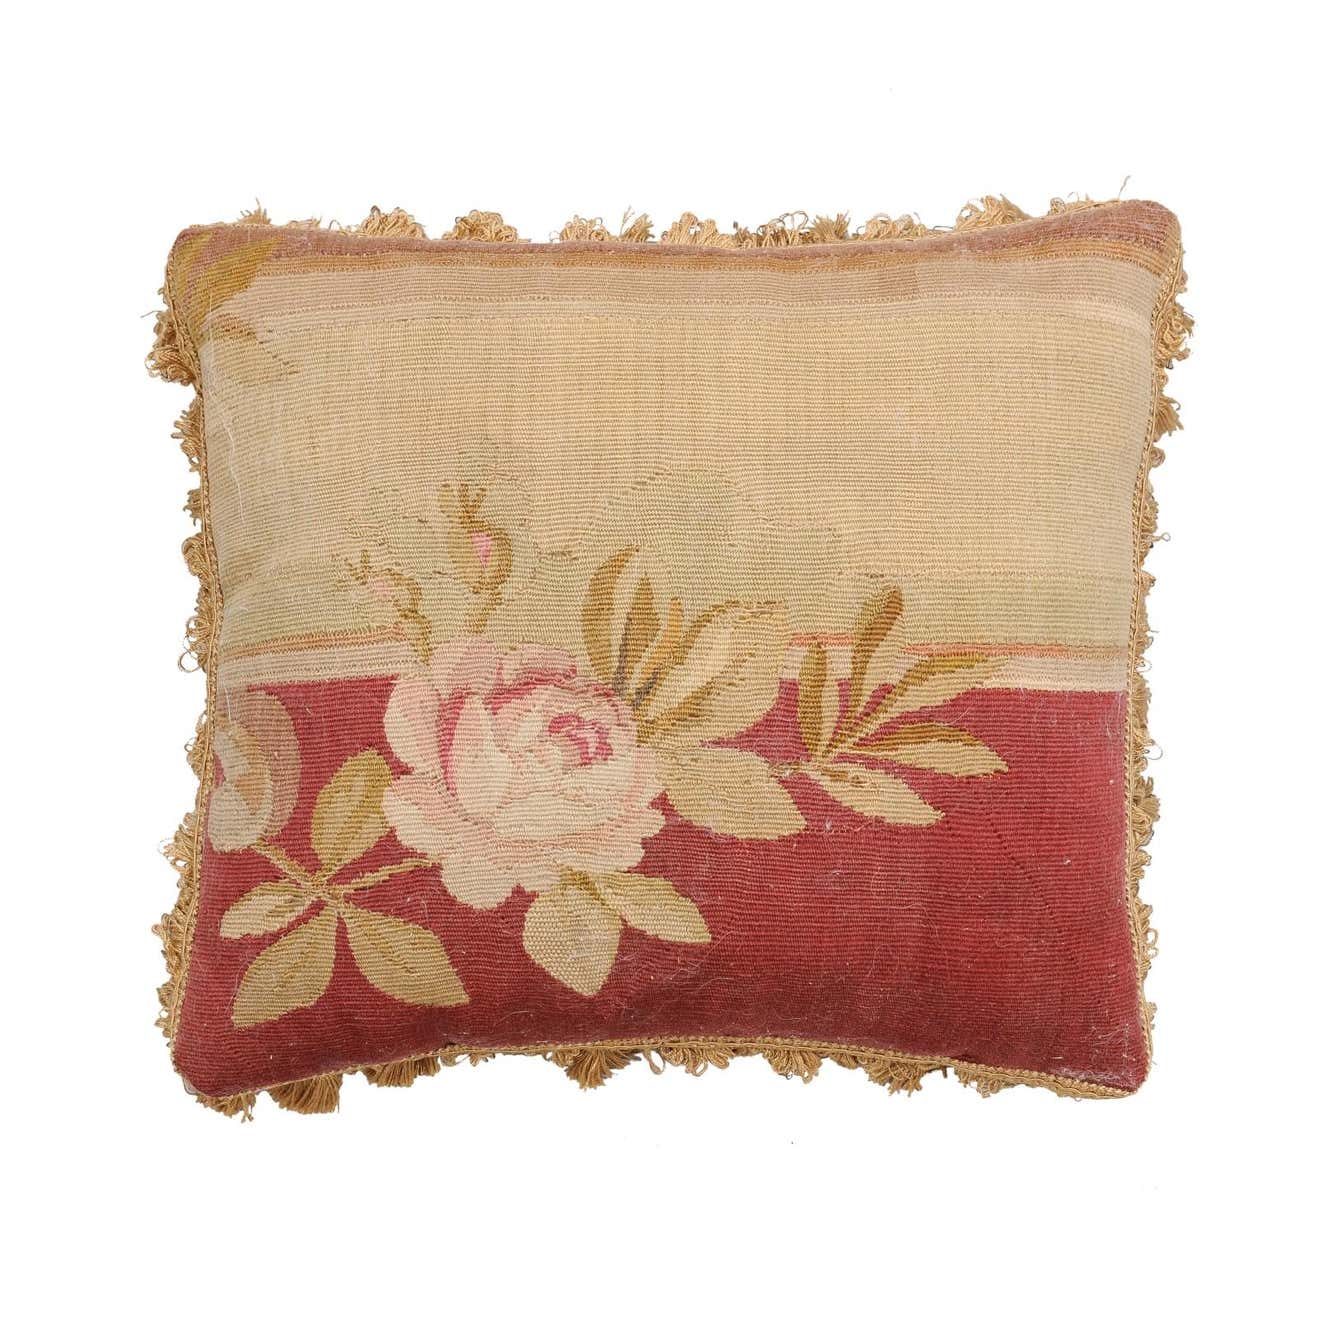 French 19th Century Aubusson Tapestry Pillow with Rose, Foliage and Tassels